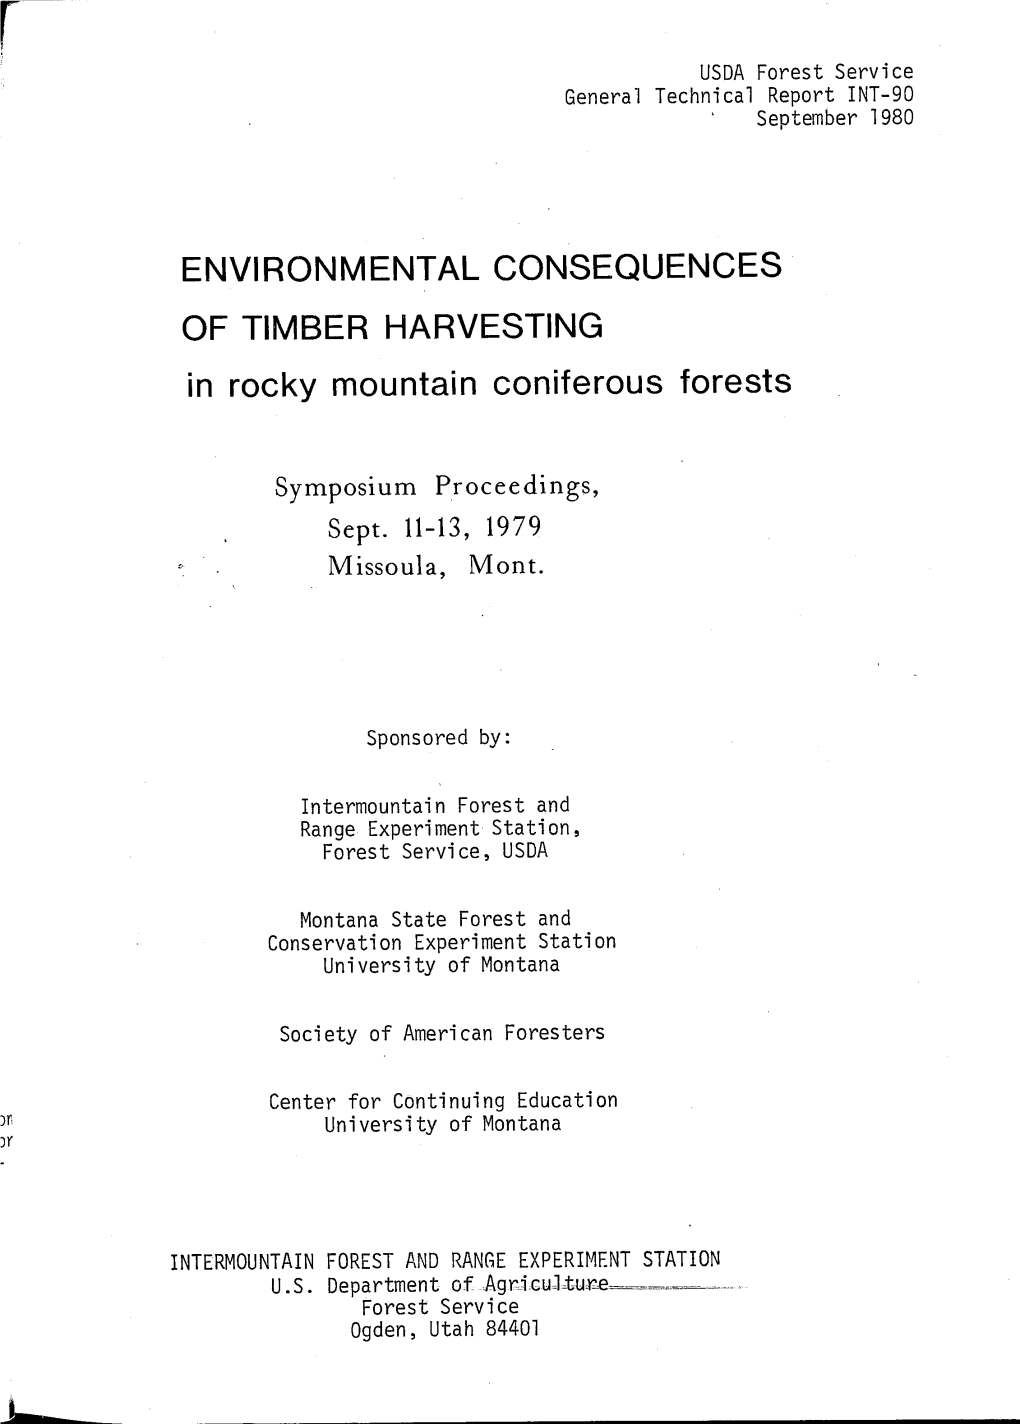 ENVIRONMENTAL CONSEQUENCES of TIMBER HARVESTING in Rocky Mountain Coniferous Forests